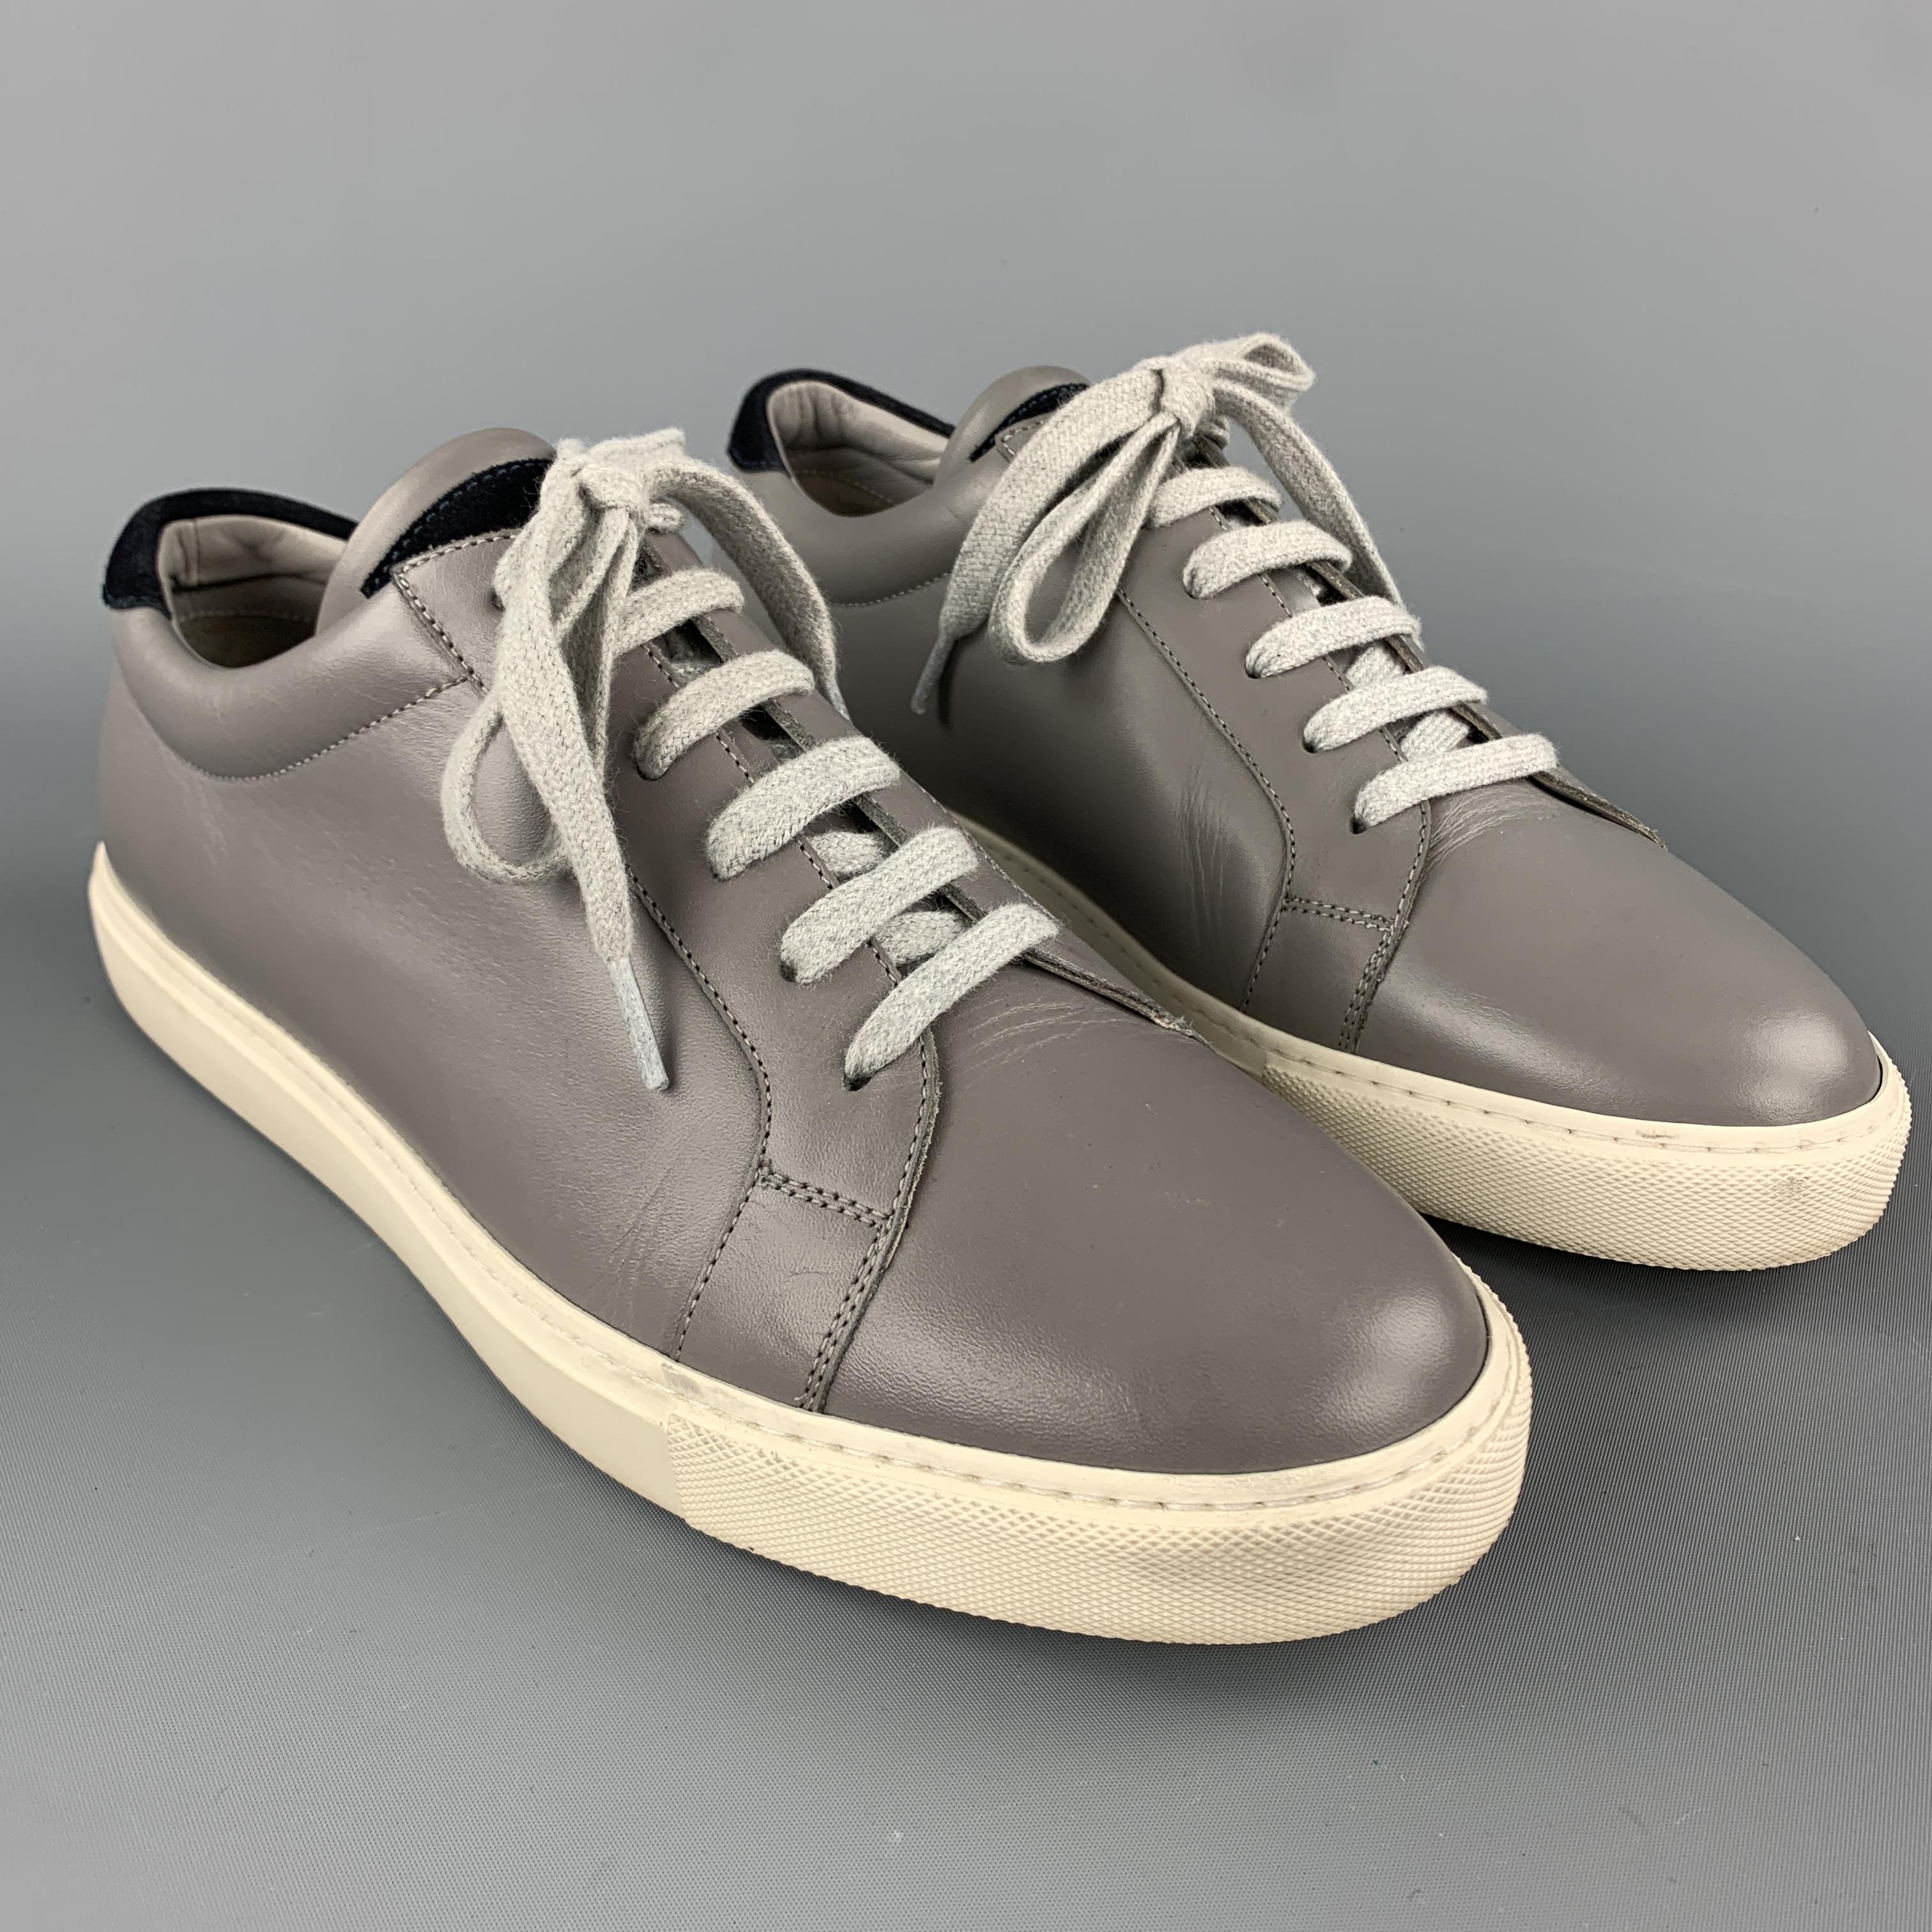 BRUNELLO CUCINELLI low top sneakers come in gray leather with navy suede back and white rubber sole. Made in Italy.

Very Good Pre-Owned Condition.
Marked: IT 43

Outsole: 11.75 x 4 in.